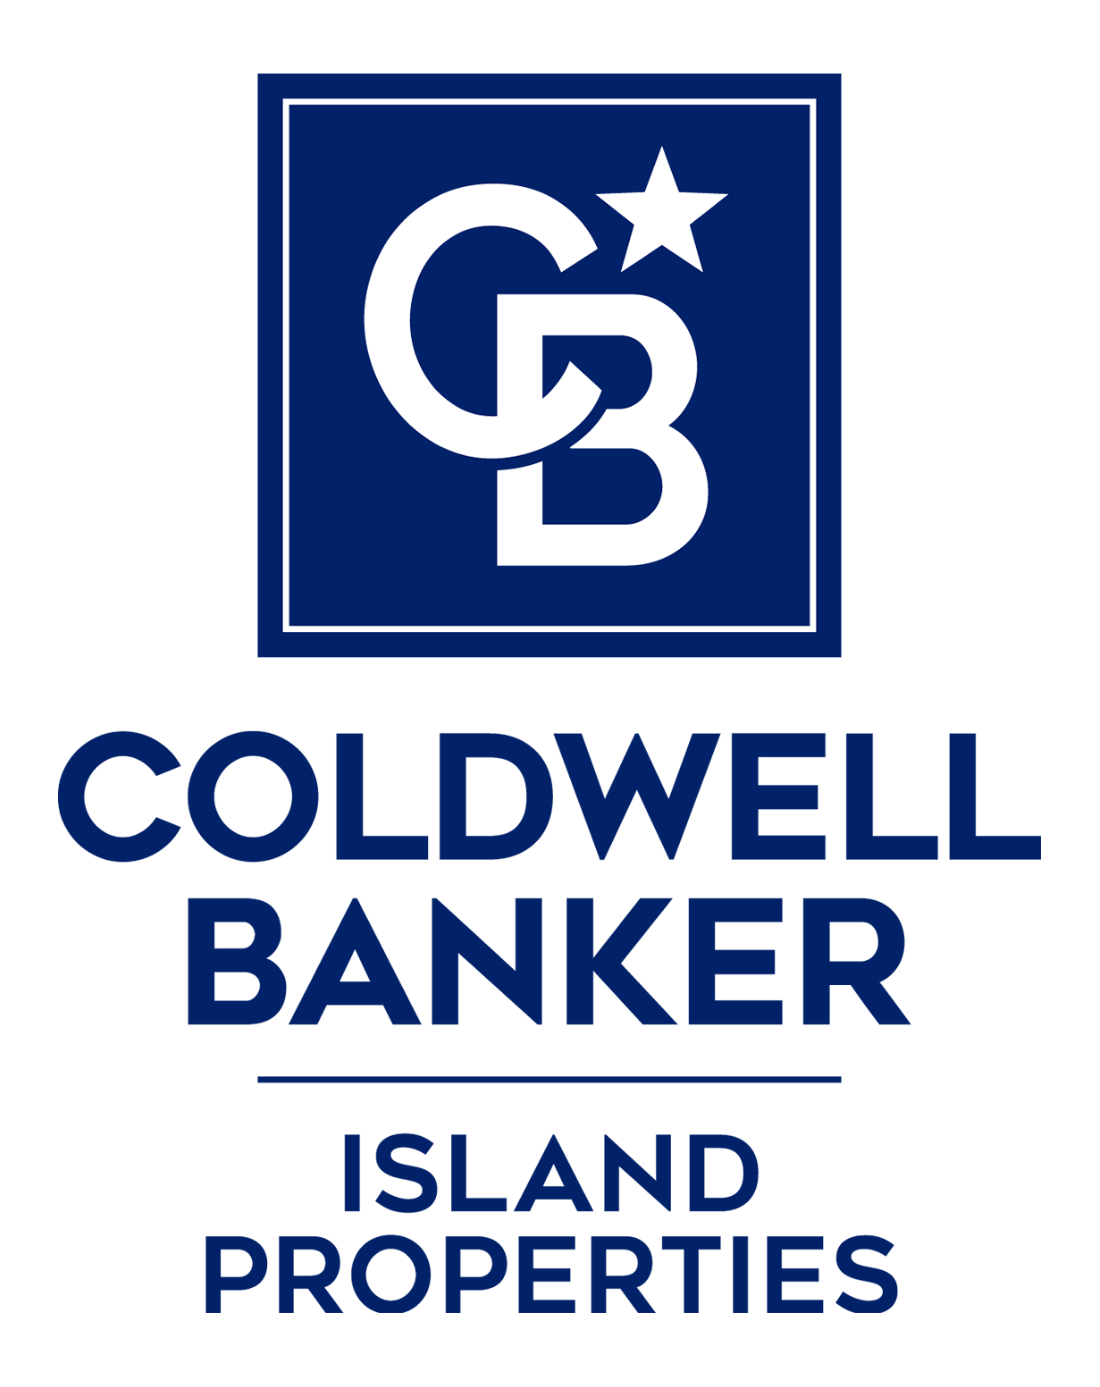 Coldwell Banker Island Properties - Coldwell Banker Island Properties Logo